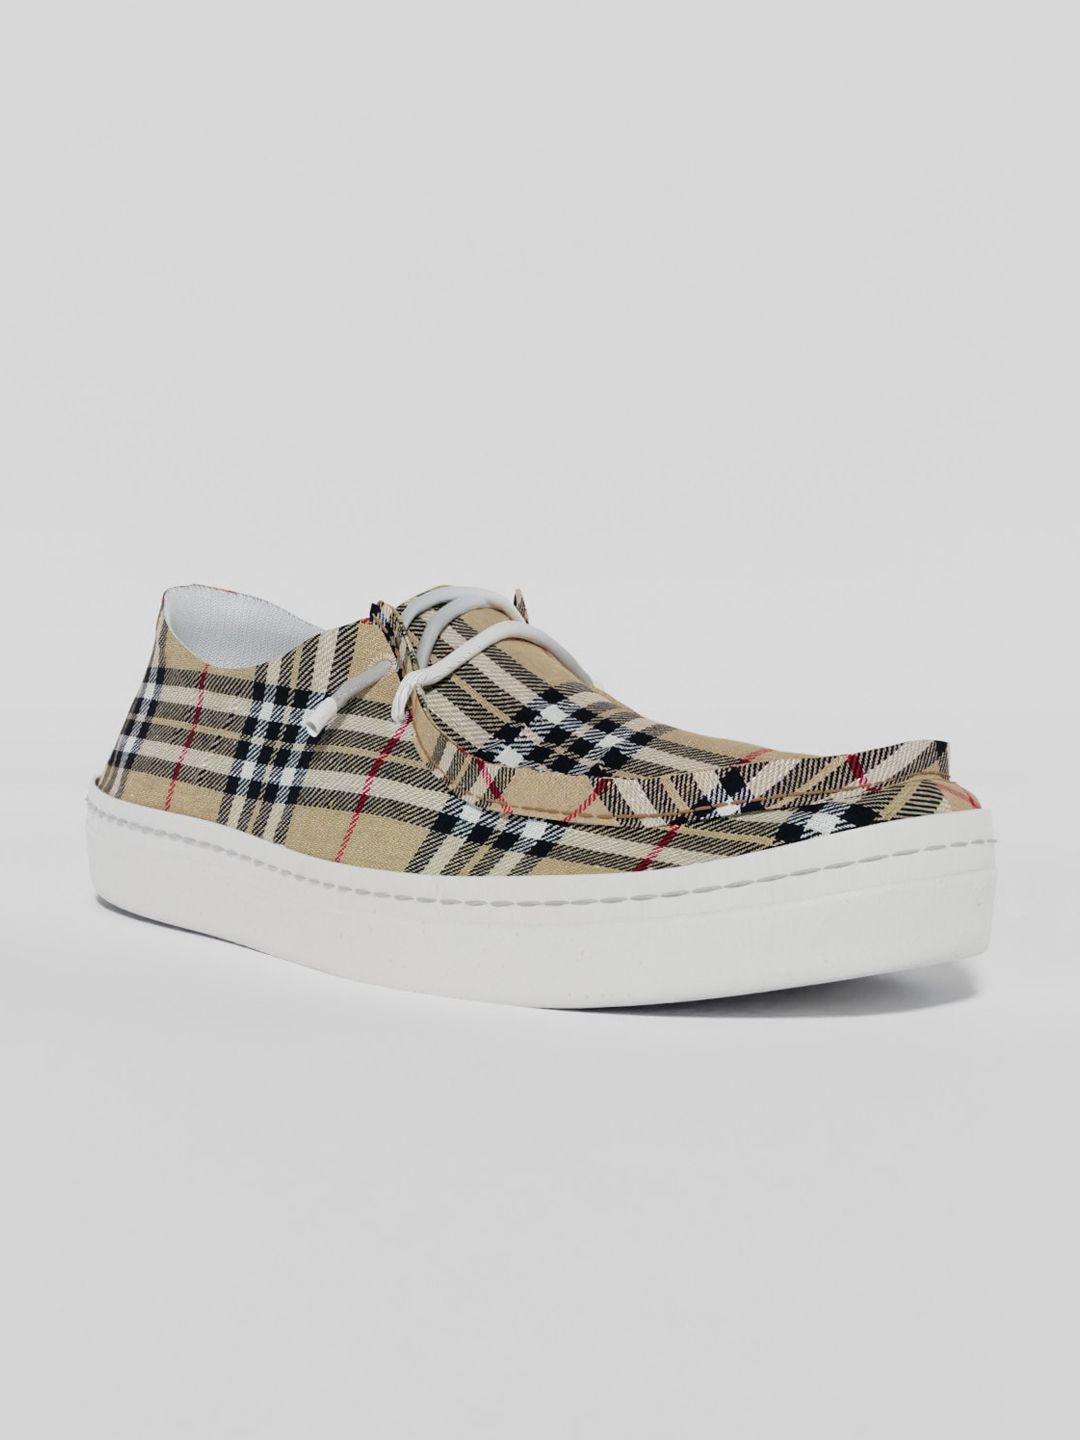 LOKAIT The Sneakers Company Women Printed Boat Shoes Price in India